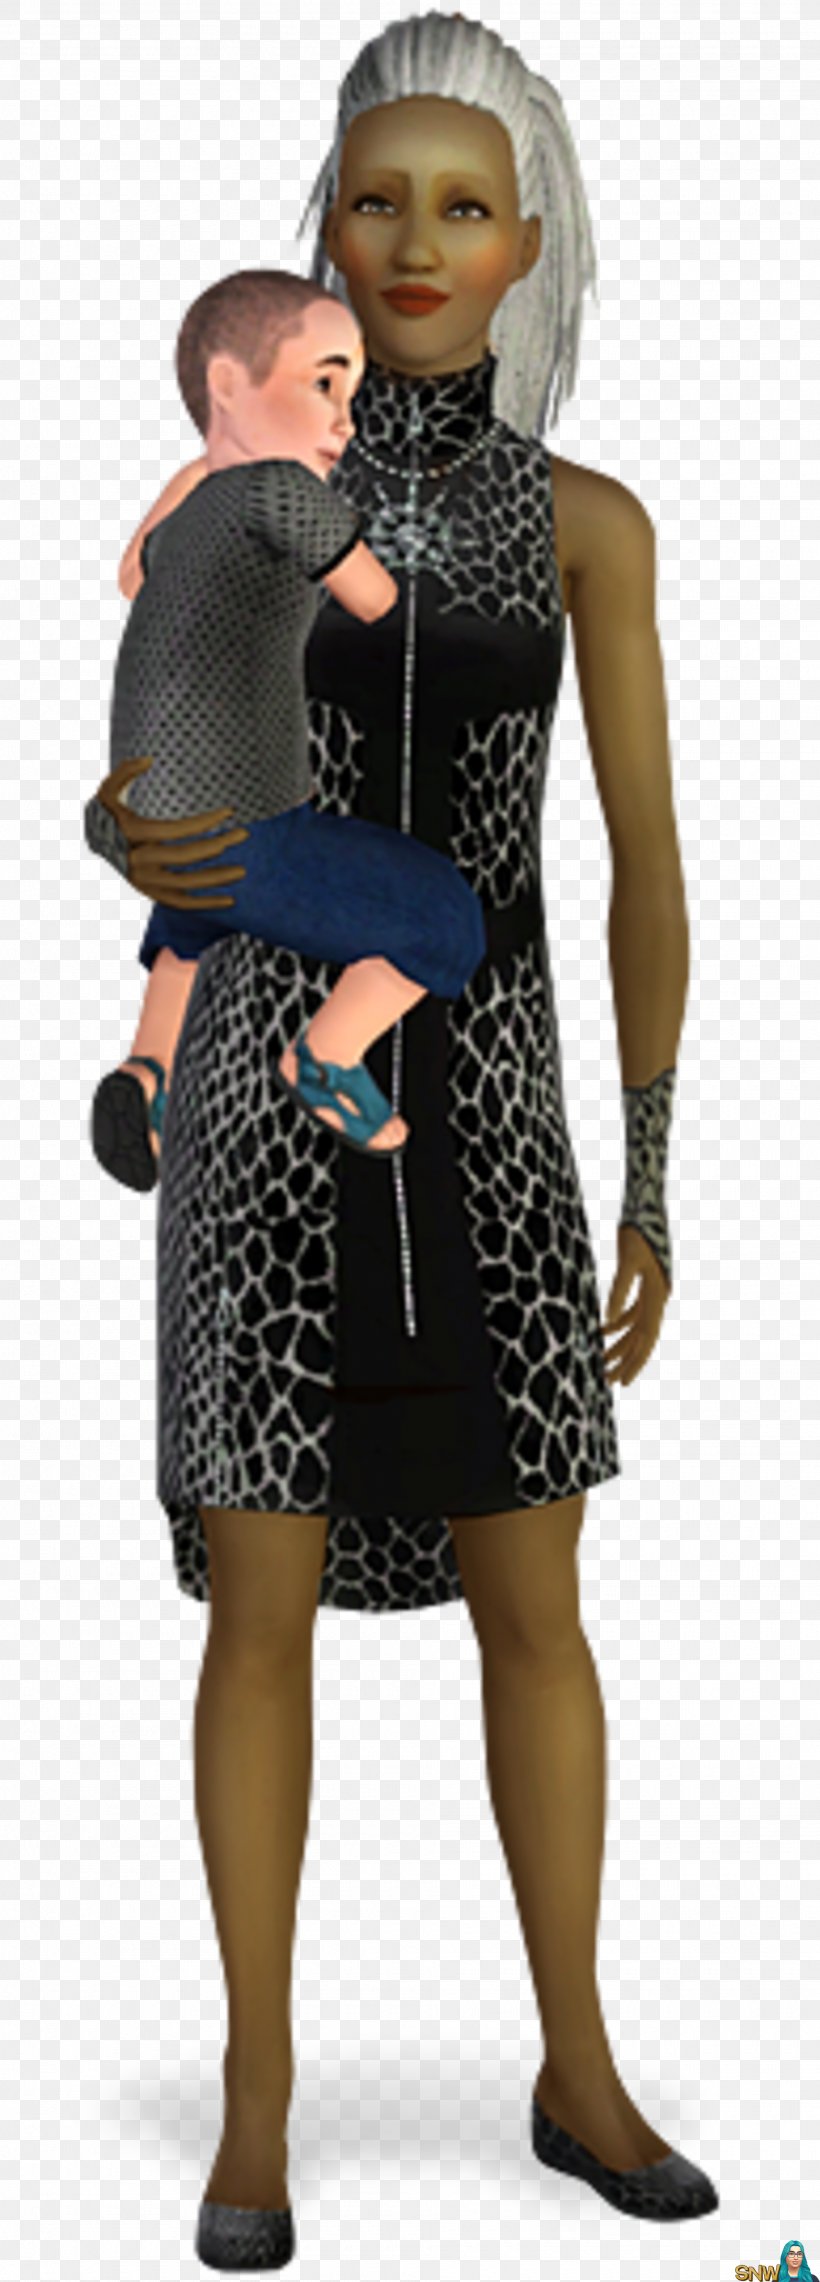 The Sims 2 Game The Sims 3: Into The Future Mod The Sims The Sims 4, PNG, 1920x5344px, Sims 2, Clothing, Costume, Dress, Electronic Arts Download Free